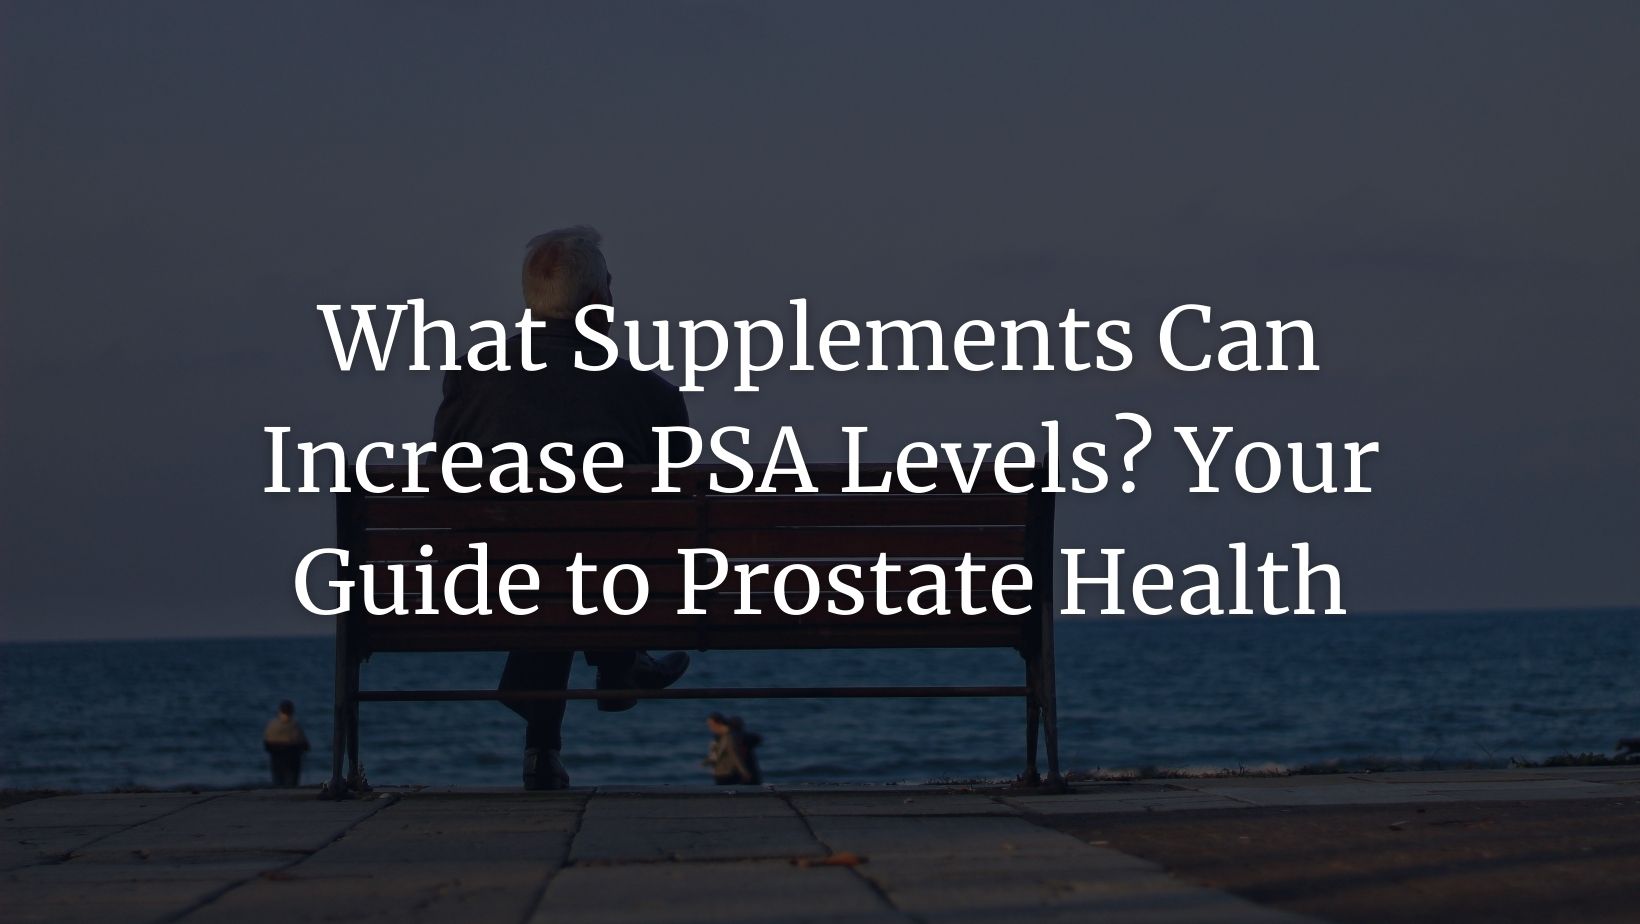 Supplements and PSA levels featured image